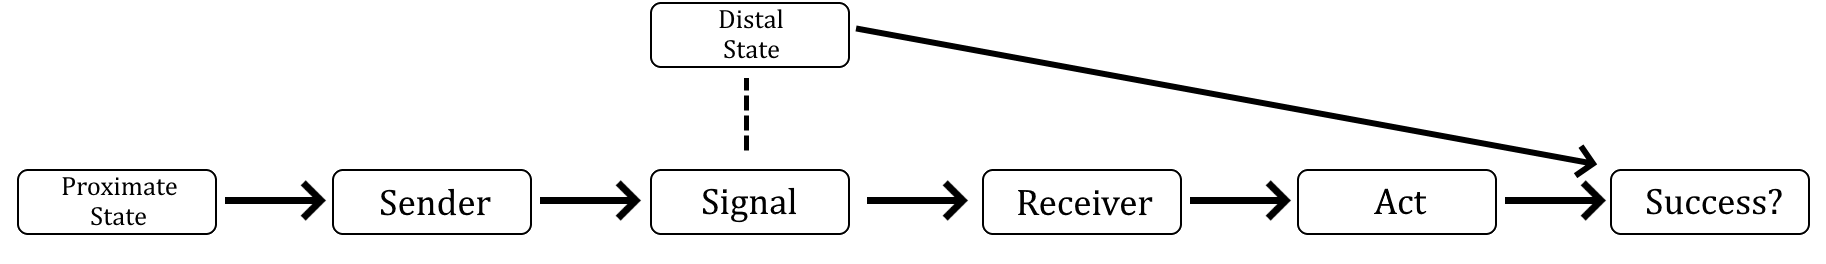 The basic teleosemantic model. A Sender and Receiver have a joint goal they must achieve. This is modelled as the requirement of setting the Success? variable to a certain value. The receiver can exercise some control by Acting, but a Distal State also has causal influence over the target. The sender can produce a Signal that bears an exploitable relation to the distal state. When the receiver can condition its behaviour on the signal and achieve greater success than otherwise, teleosemantics claims that explaining this improvement requires appealing to a relation between signal and distal state (dashed line). This is a relation of semantic content: the signal’s truth condition is the distal state that must obtain in order for the receiver’s act, guided by the signal, to be successful. Finally, how the sender actually produces such a signal is usually by conditioning on one or more upstream Proximate States. In special cases, the proximate and distal states are identical (see figures  and ). See also Millikan (2004, fig. 6.3, p. 78).